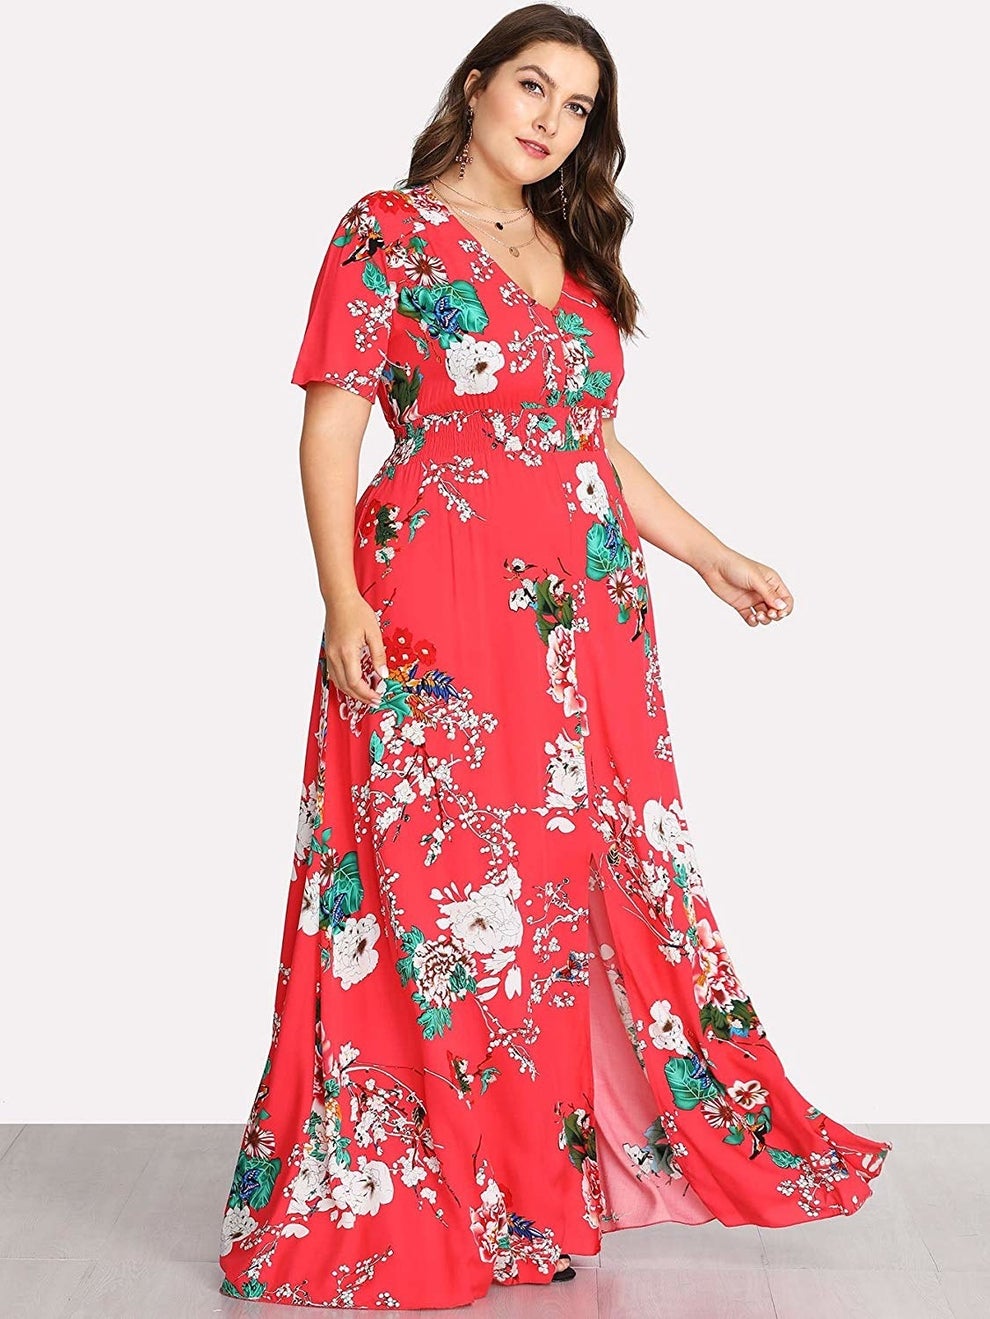 The Best Maxi Dresses You Can Get On Amazon